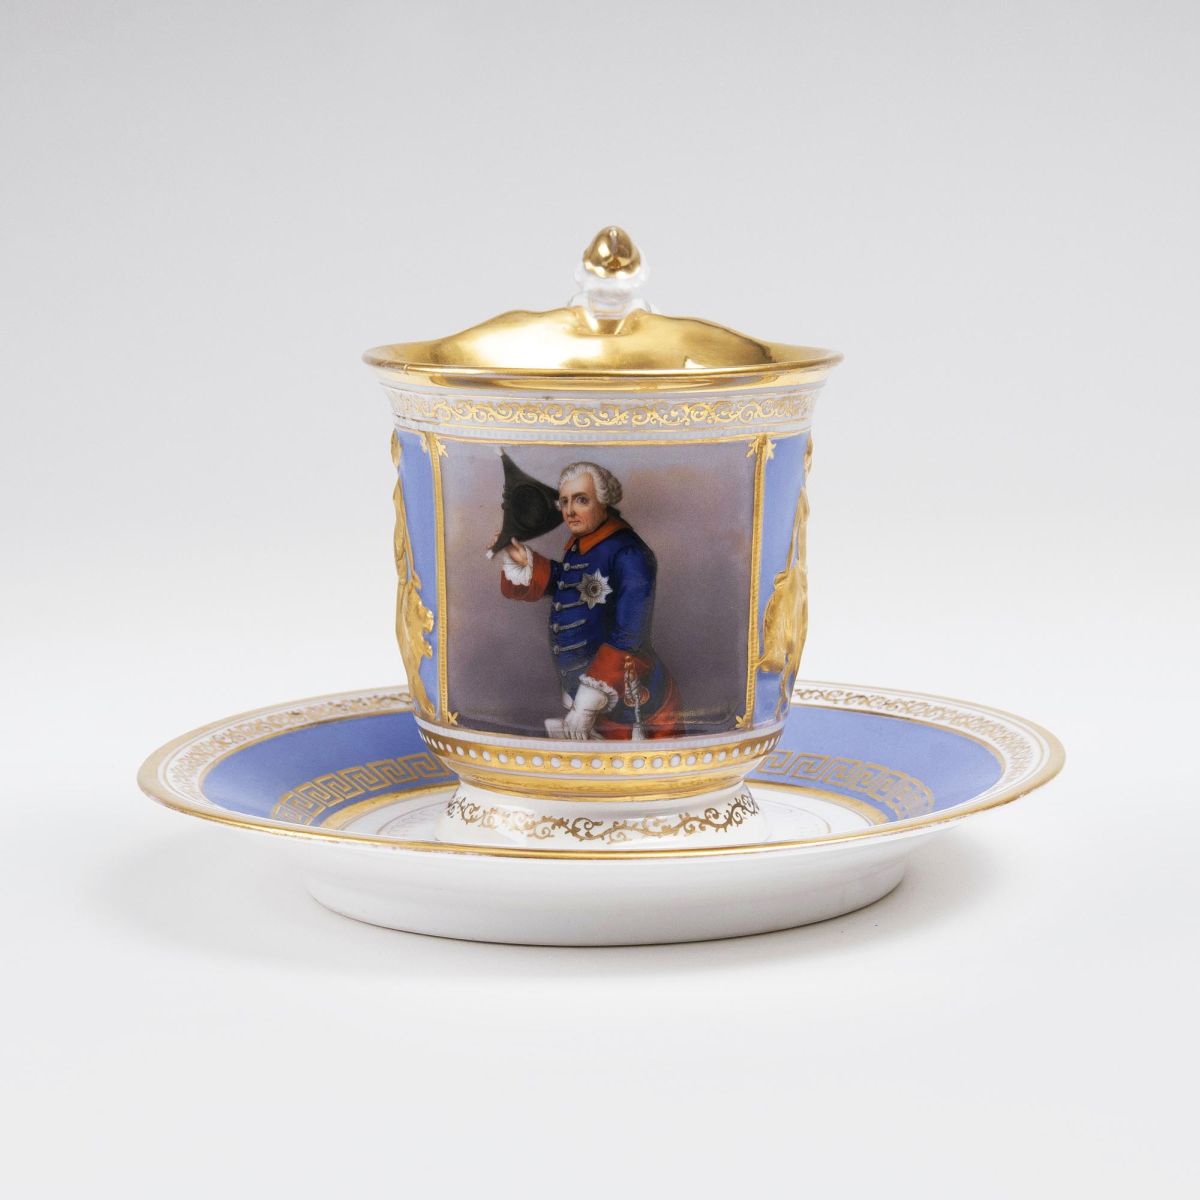 A Large Berlin Portrait Cup 'Frederic the Great'